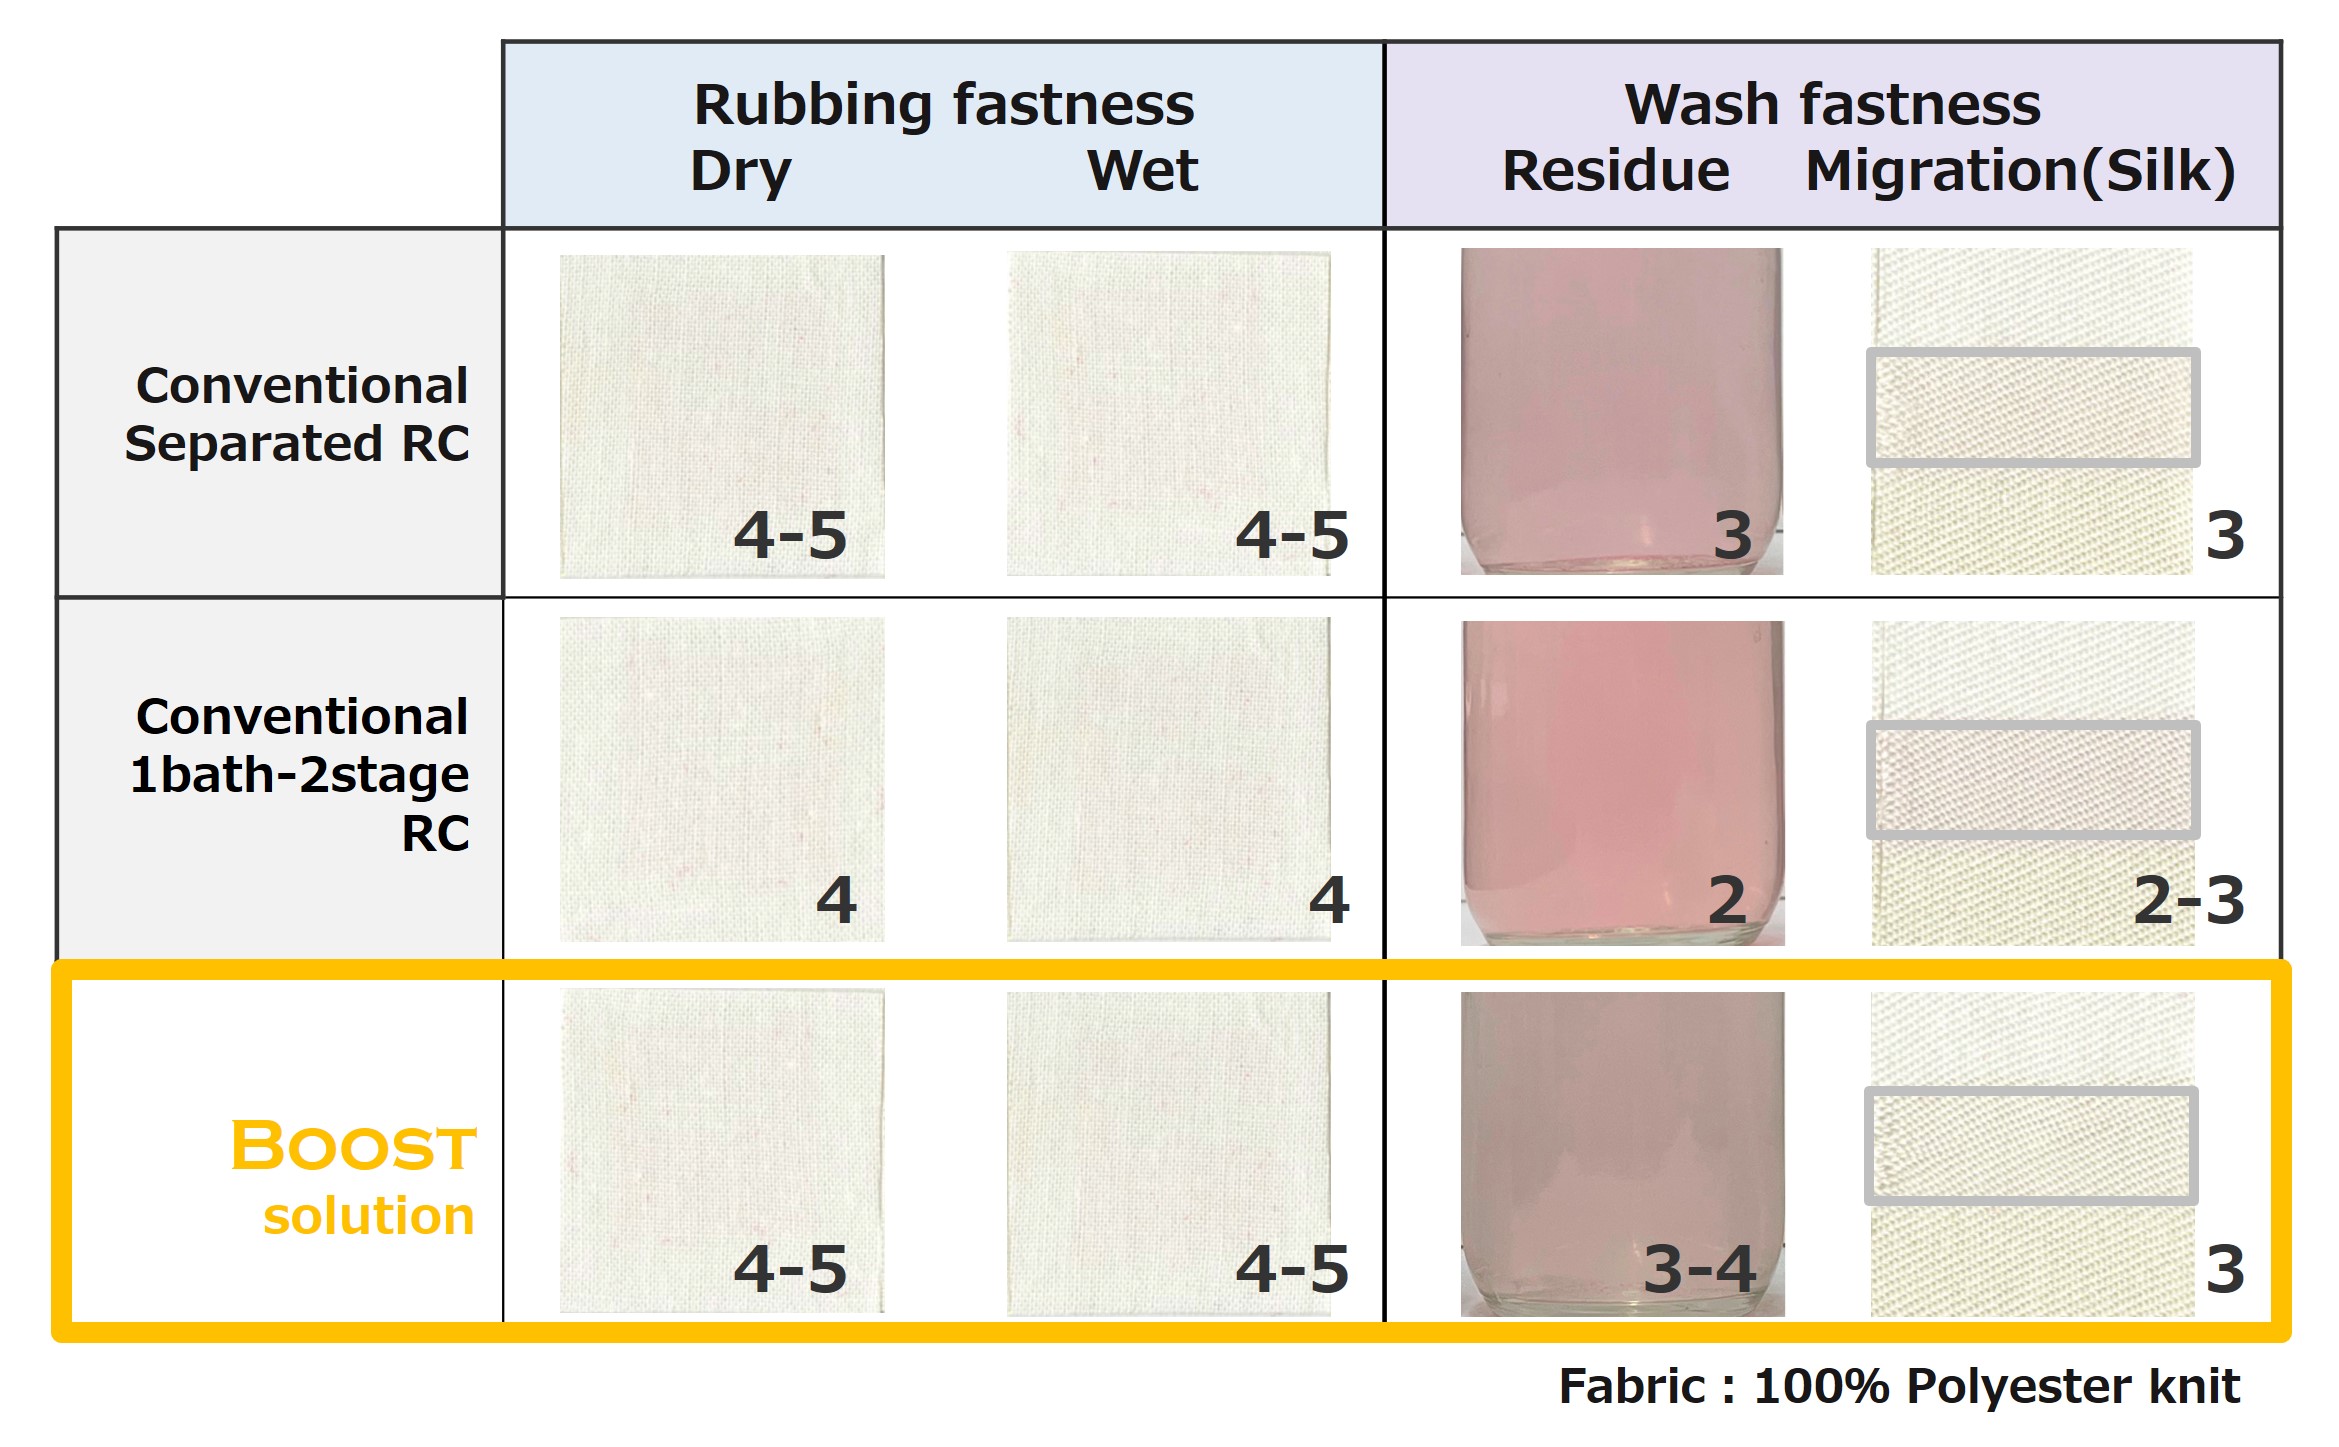 Rubbing fastness is level 4-5,and wash fastness is level 3